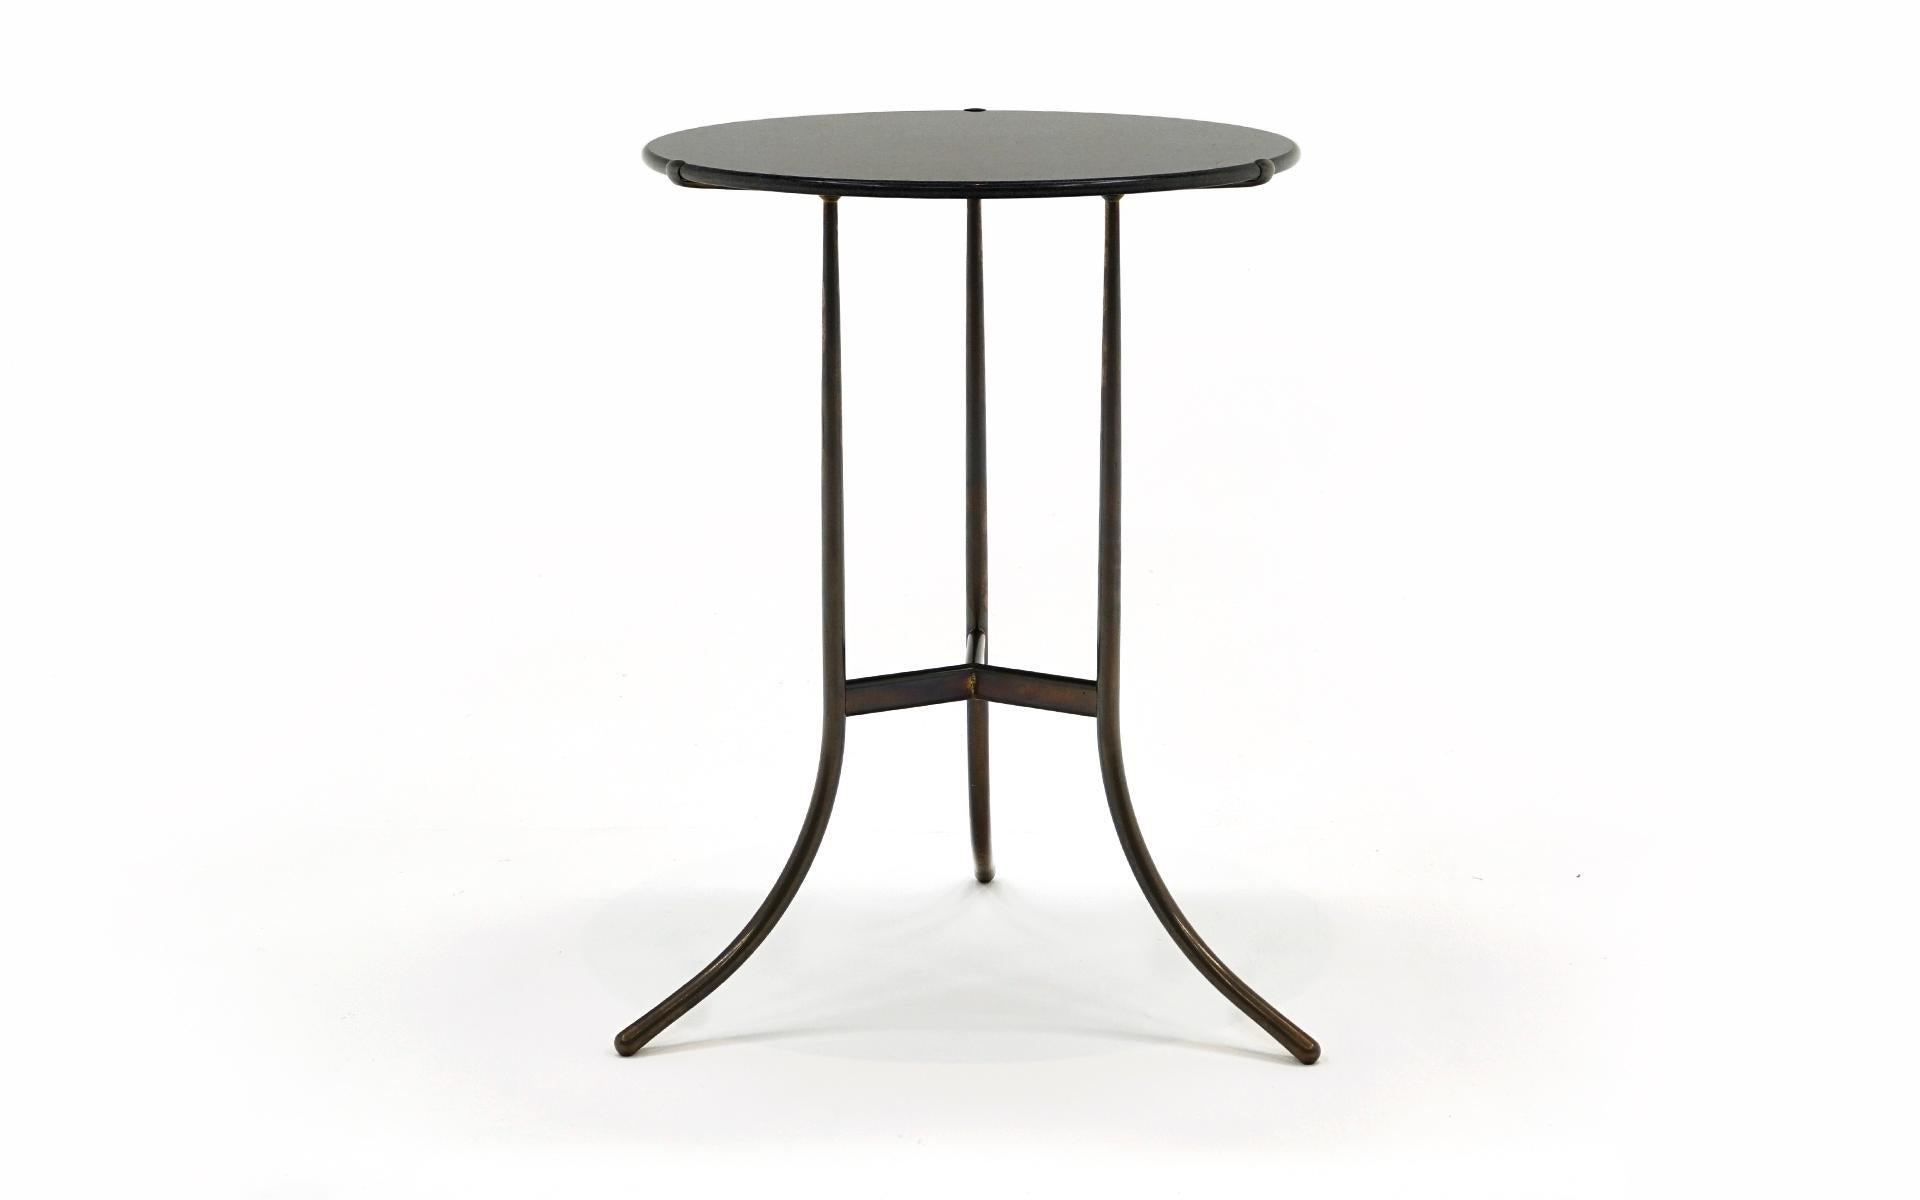 Cedric Harman end table.  Dark grey / charcoal / almost black round marble top with brass frame.  The brass has a beautiful even patina presenting in a soft luster.  The frame could be polished to a shiny finish at the customers request but we